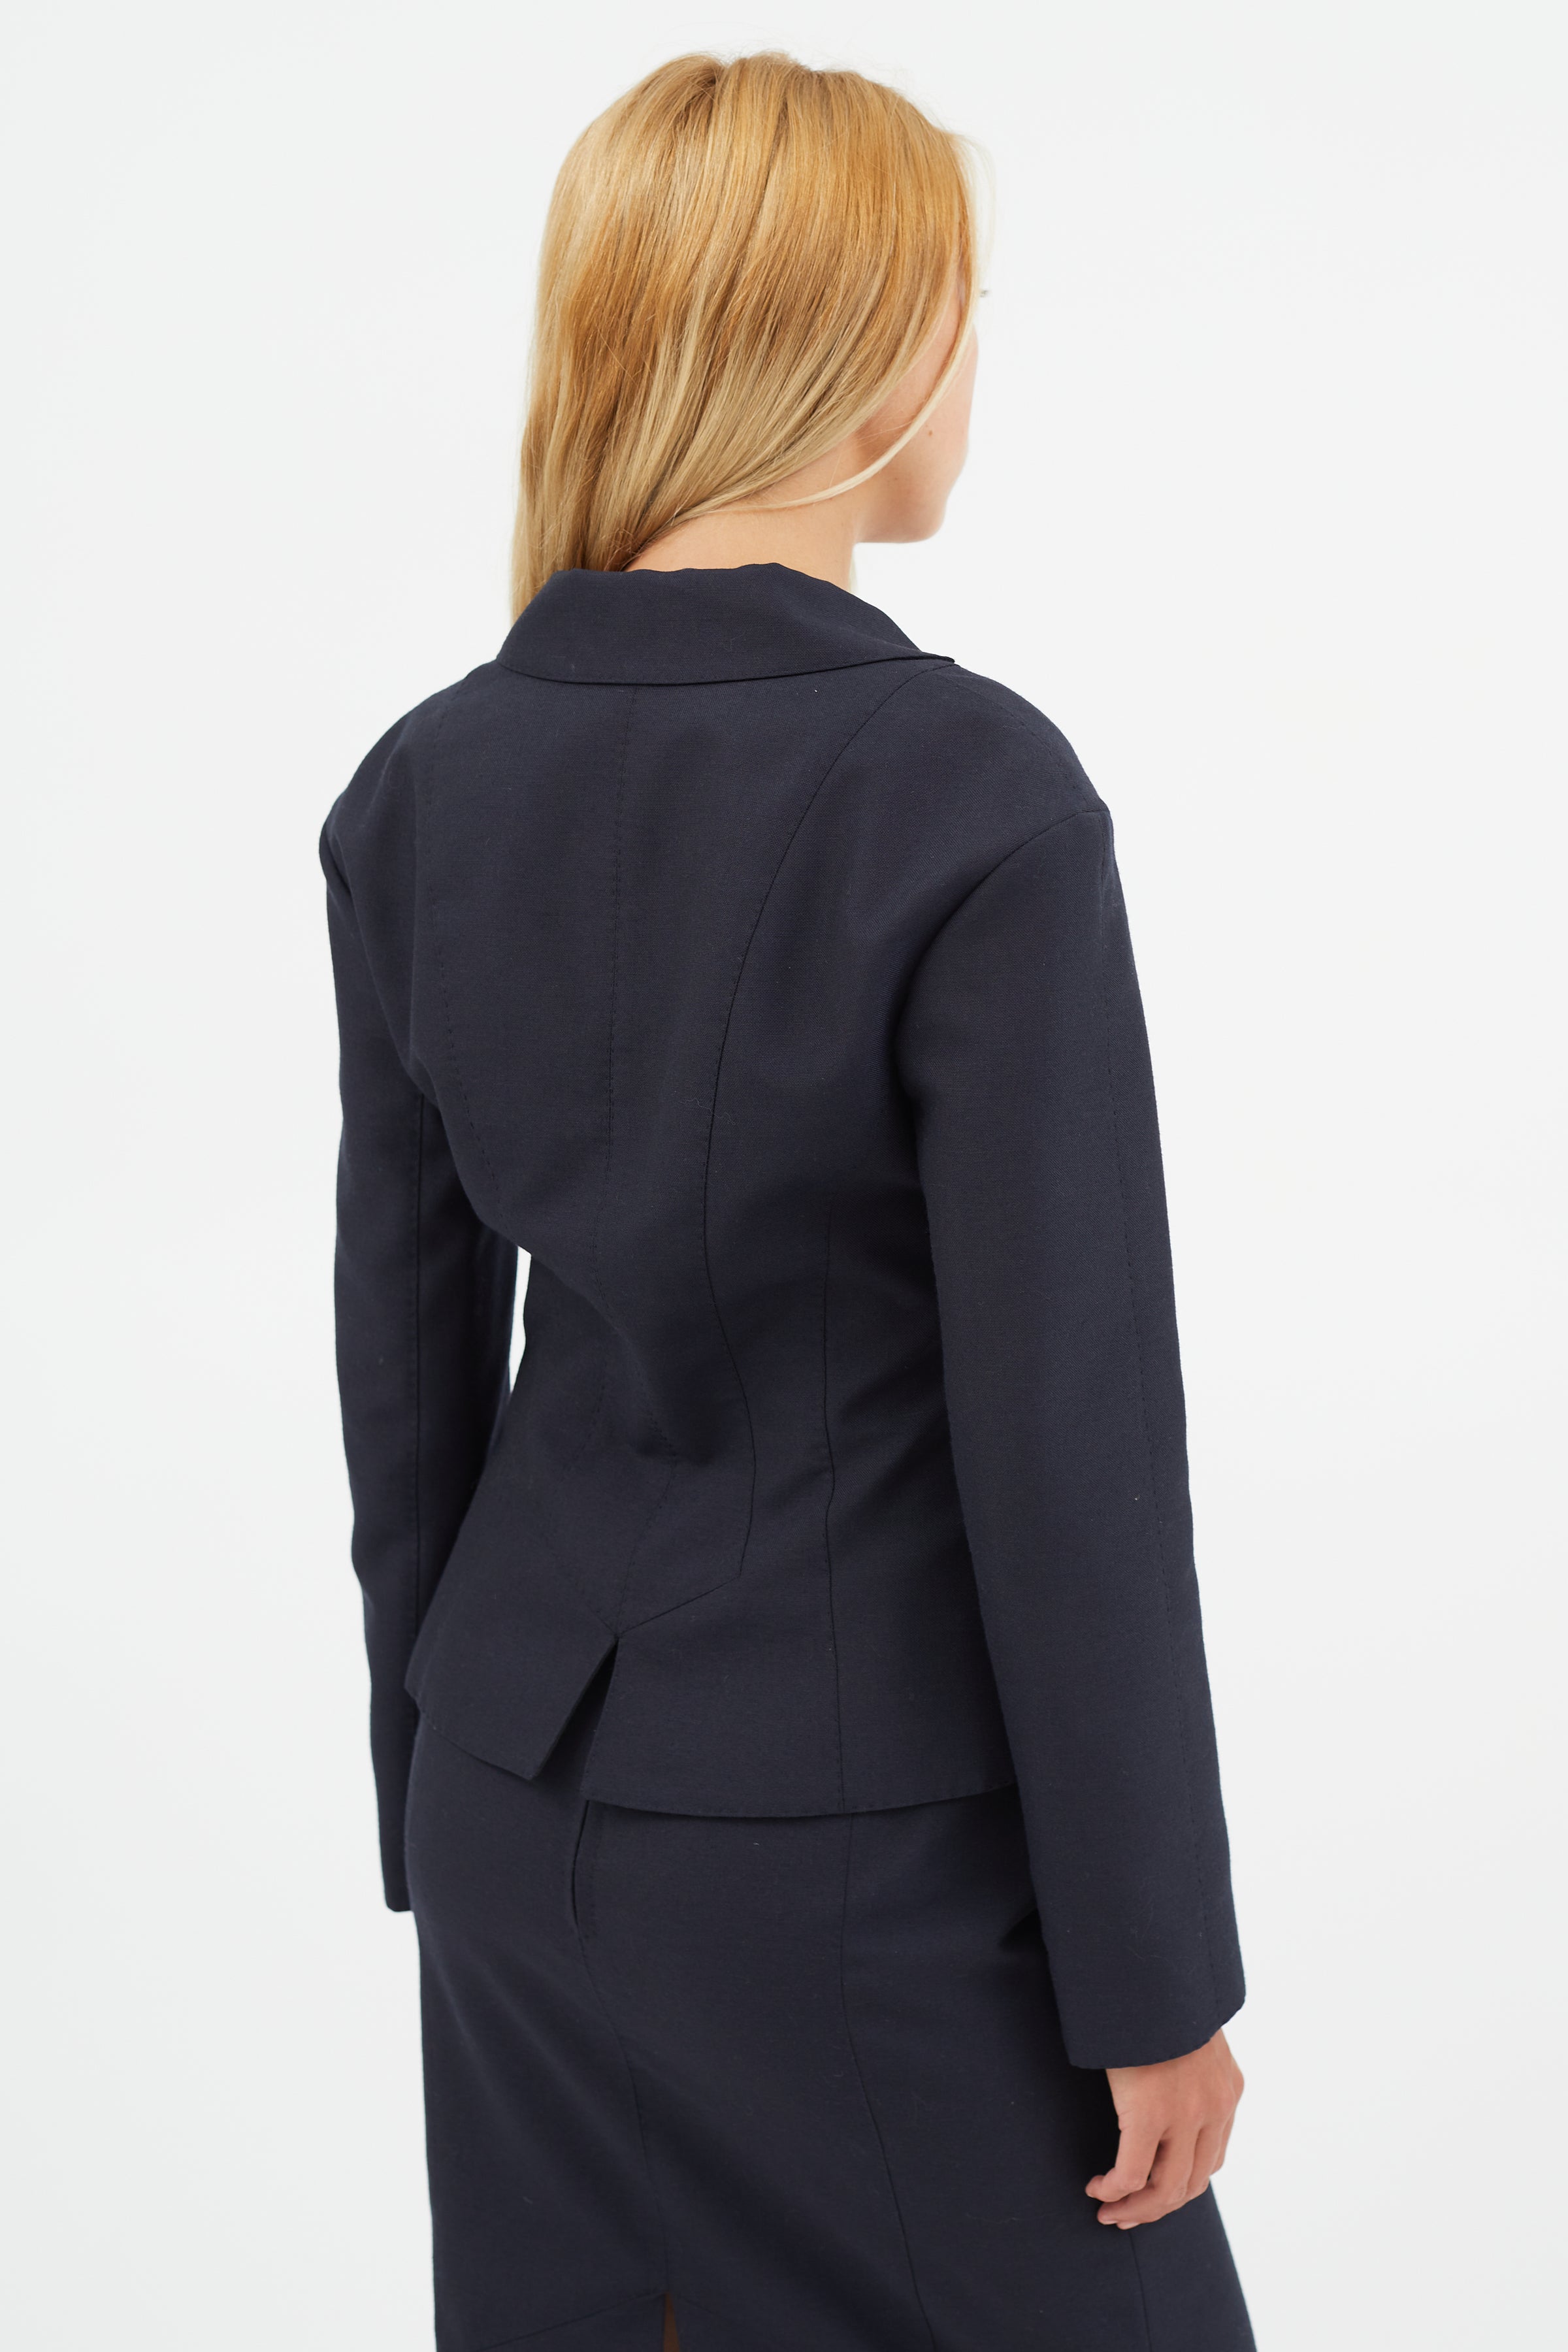 Louis Vuitton - Authenticated Jacket - Wool Blue for Women, Very Good Condition